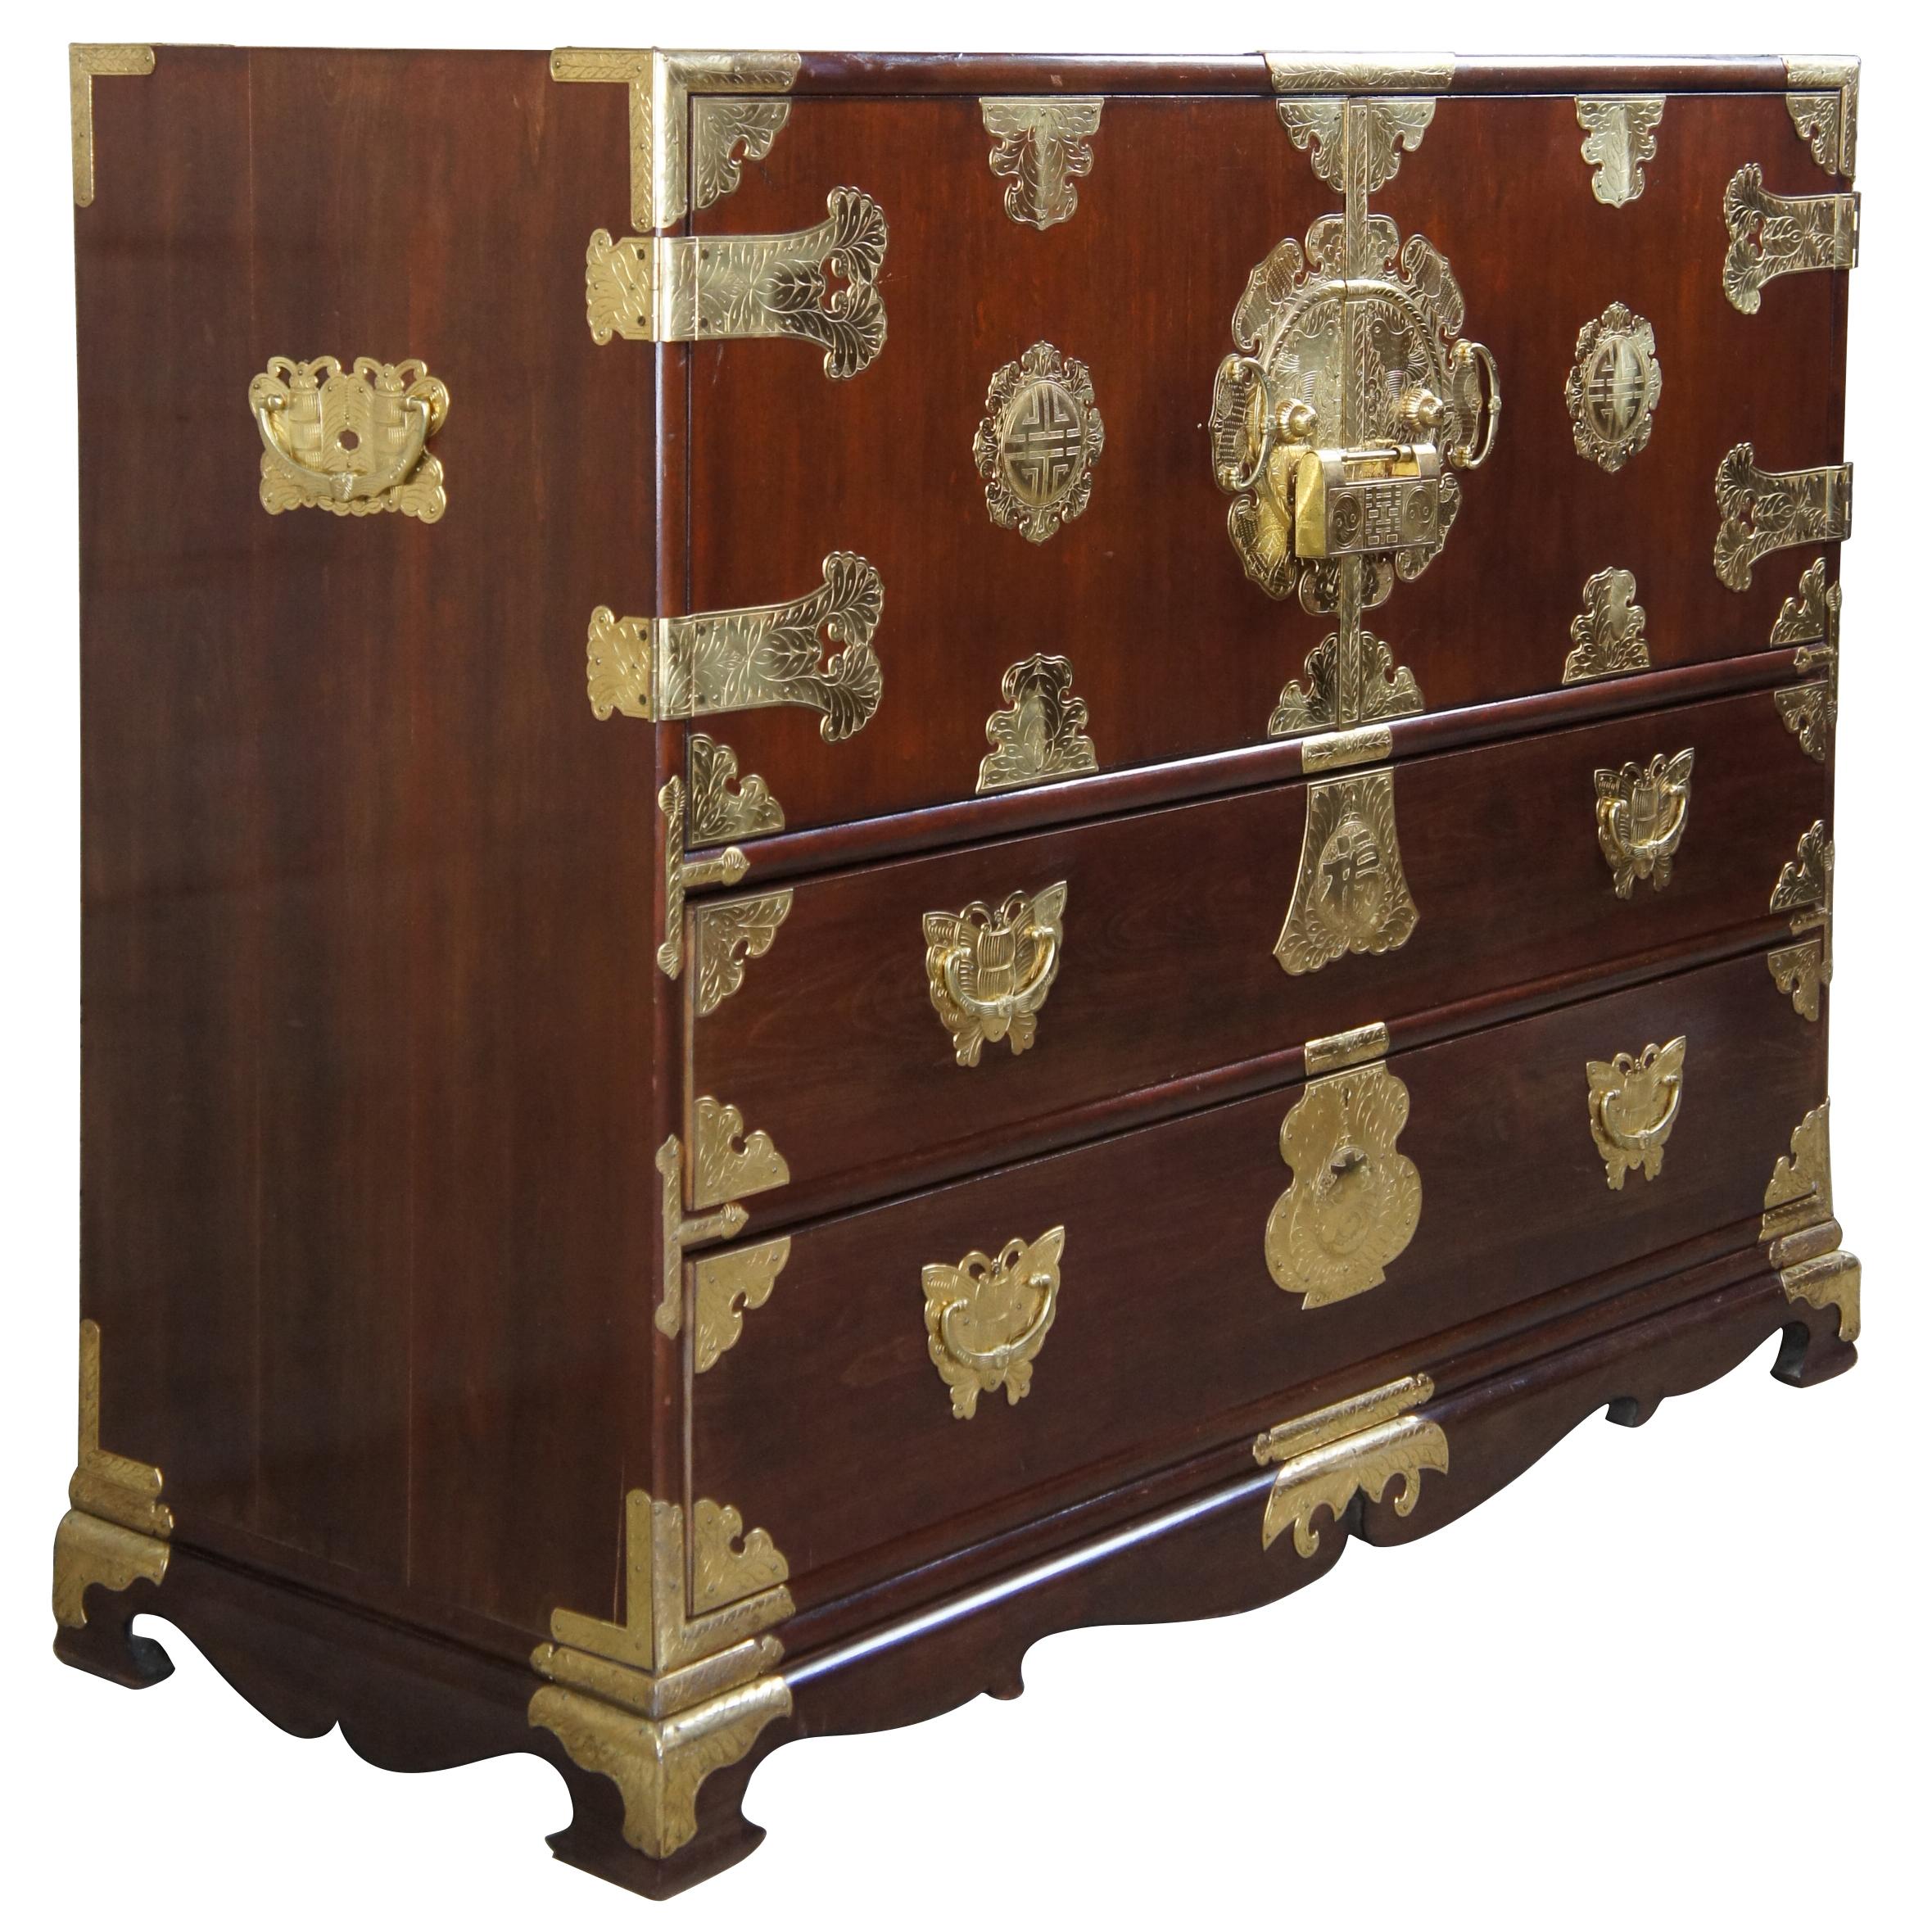 Midcentury Korean brass mounted elm sideboard / tansu, with profuse engraved brass butterfly and medallion mounts, two blind doors revealing five fitted interior upper drawers, and two lower long drawers. Includes ornate brass lock and key and